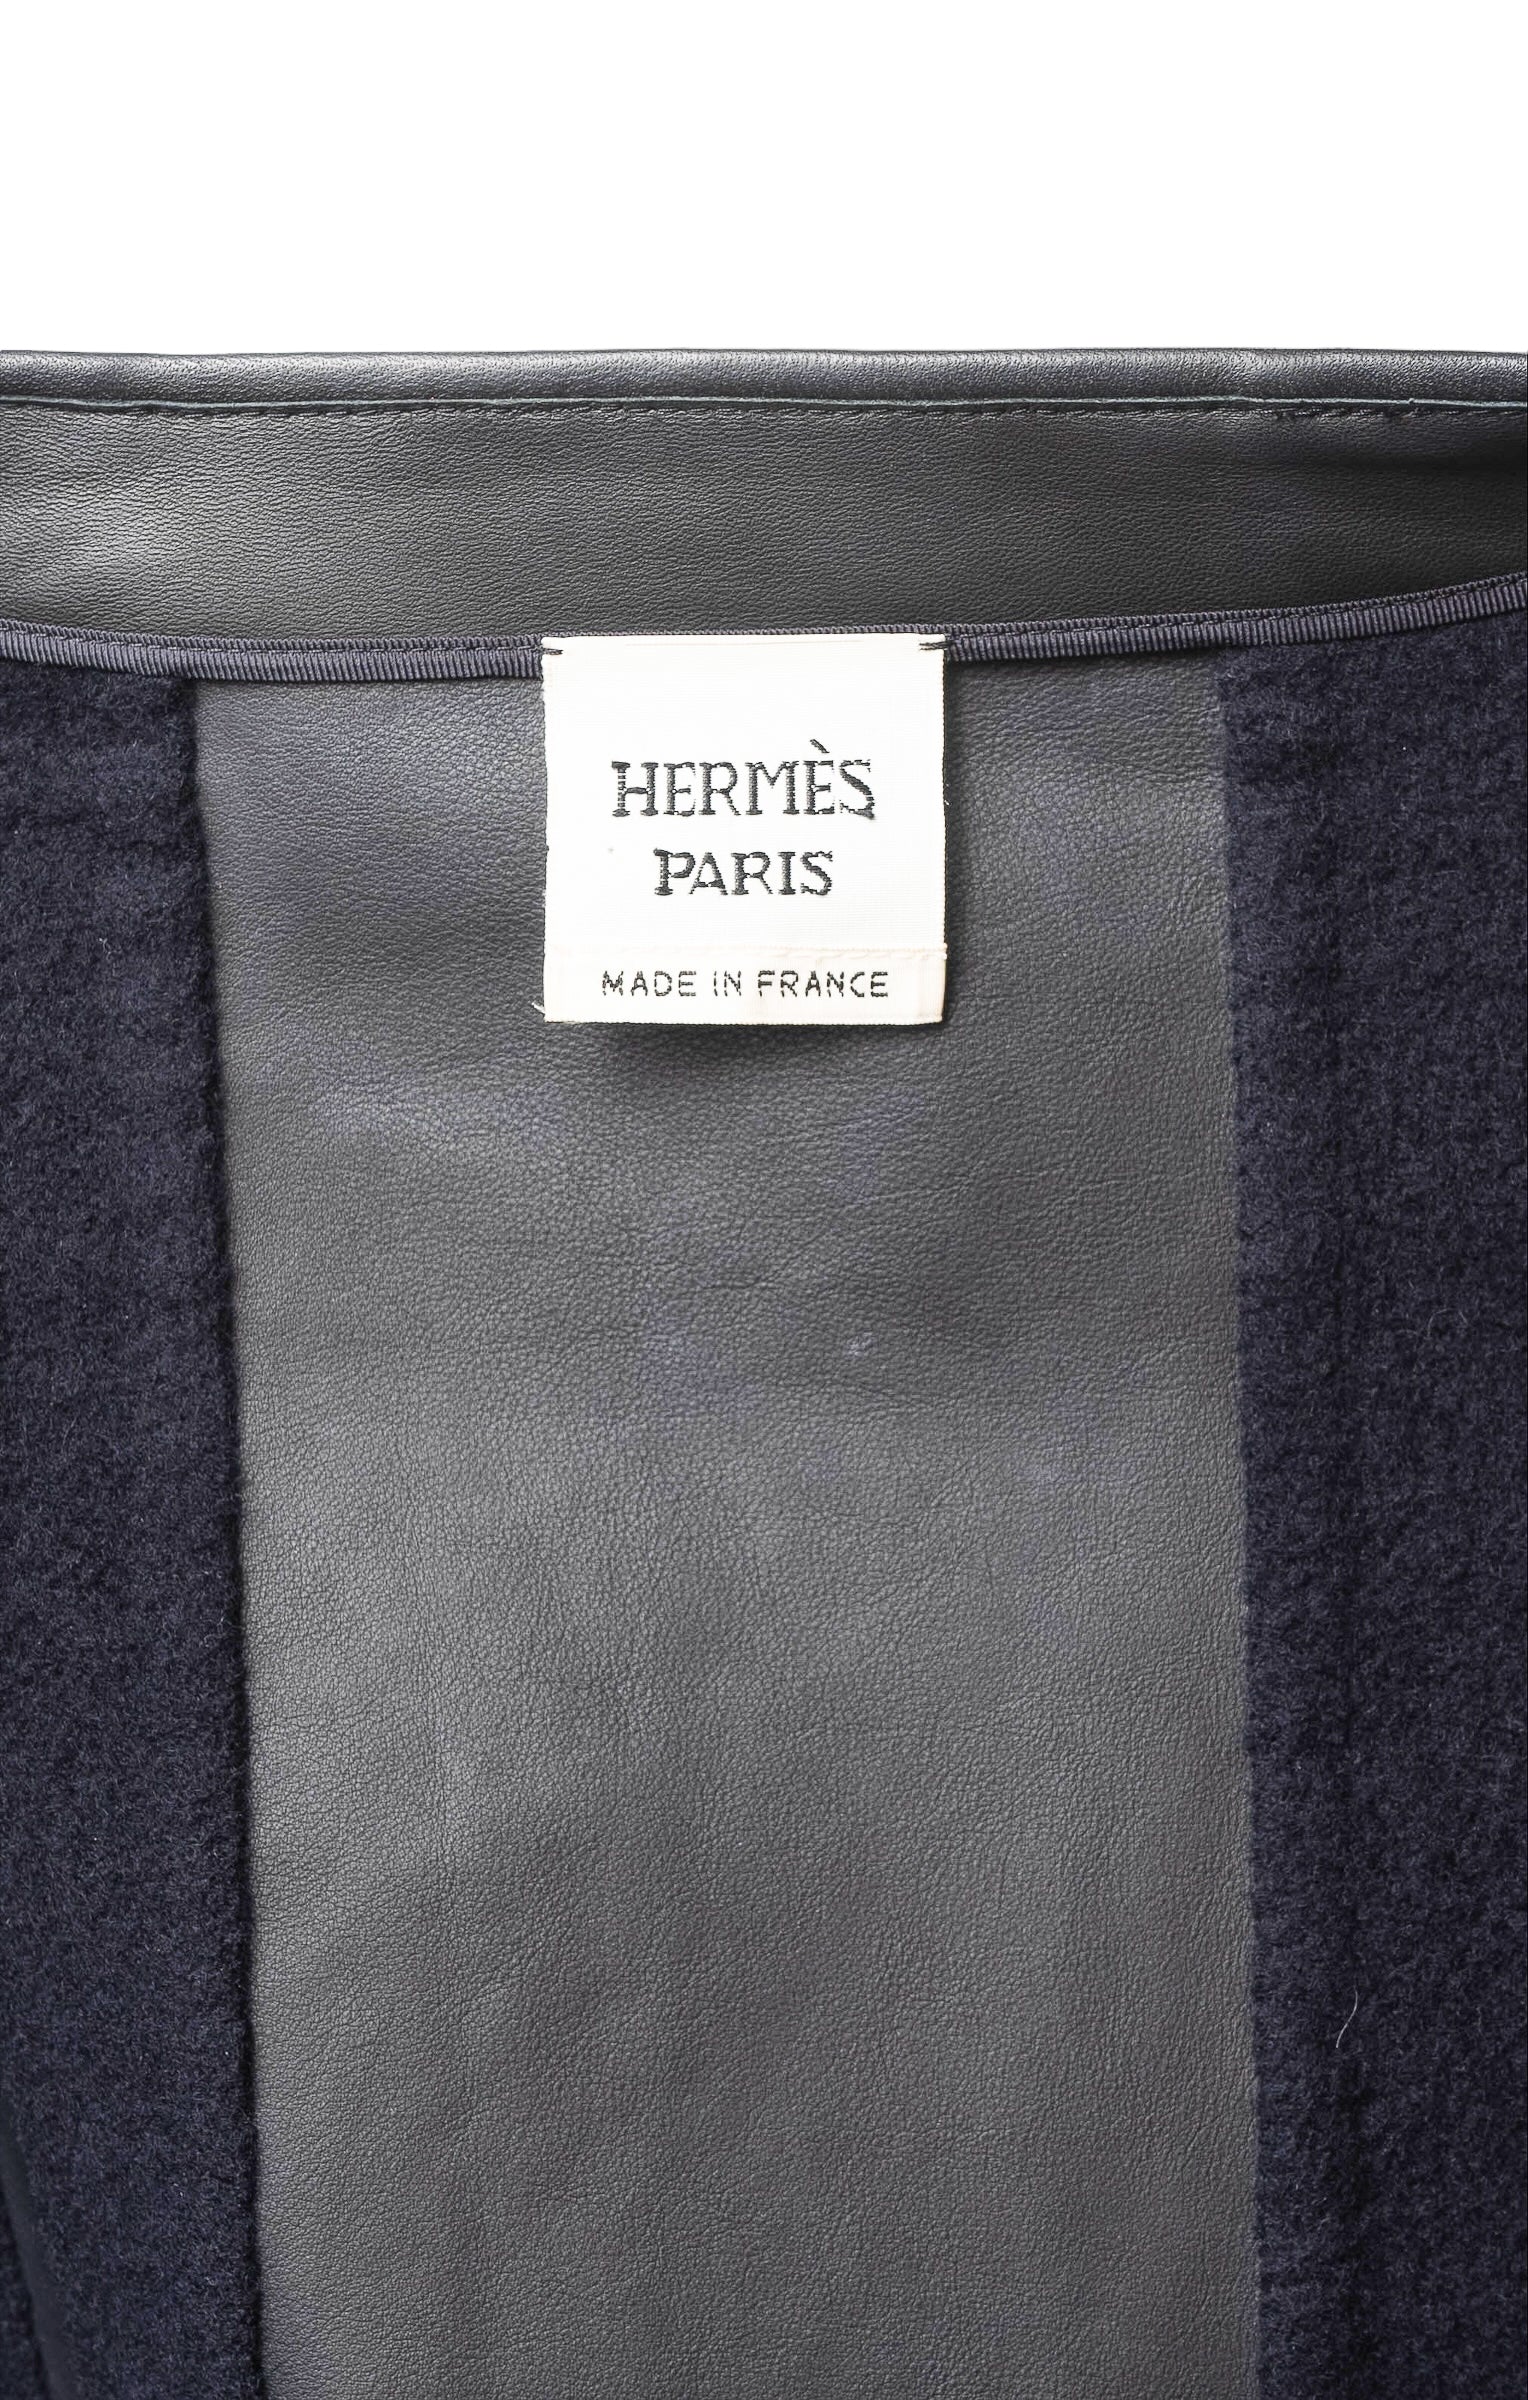 HERMÈS (RARE) Coat Size: FR 38 / Comparable to US 4-6